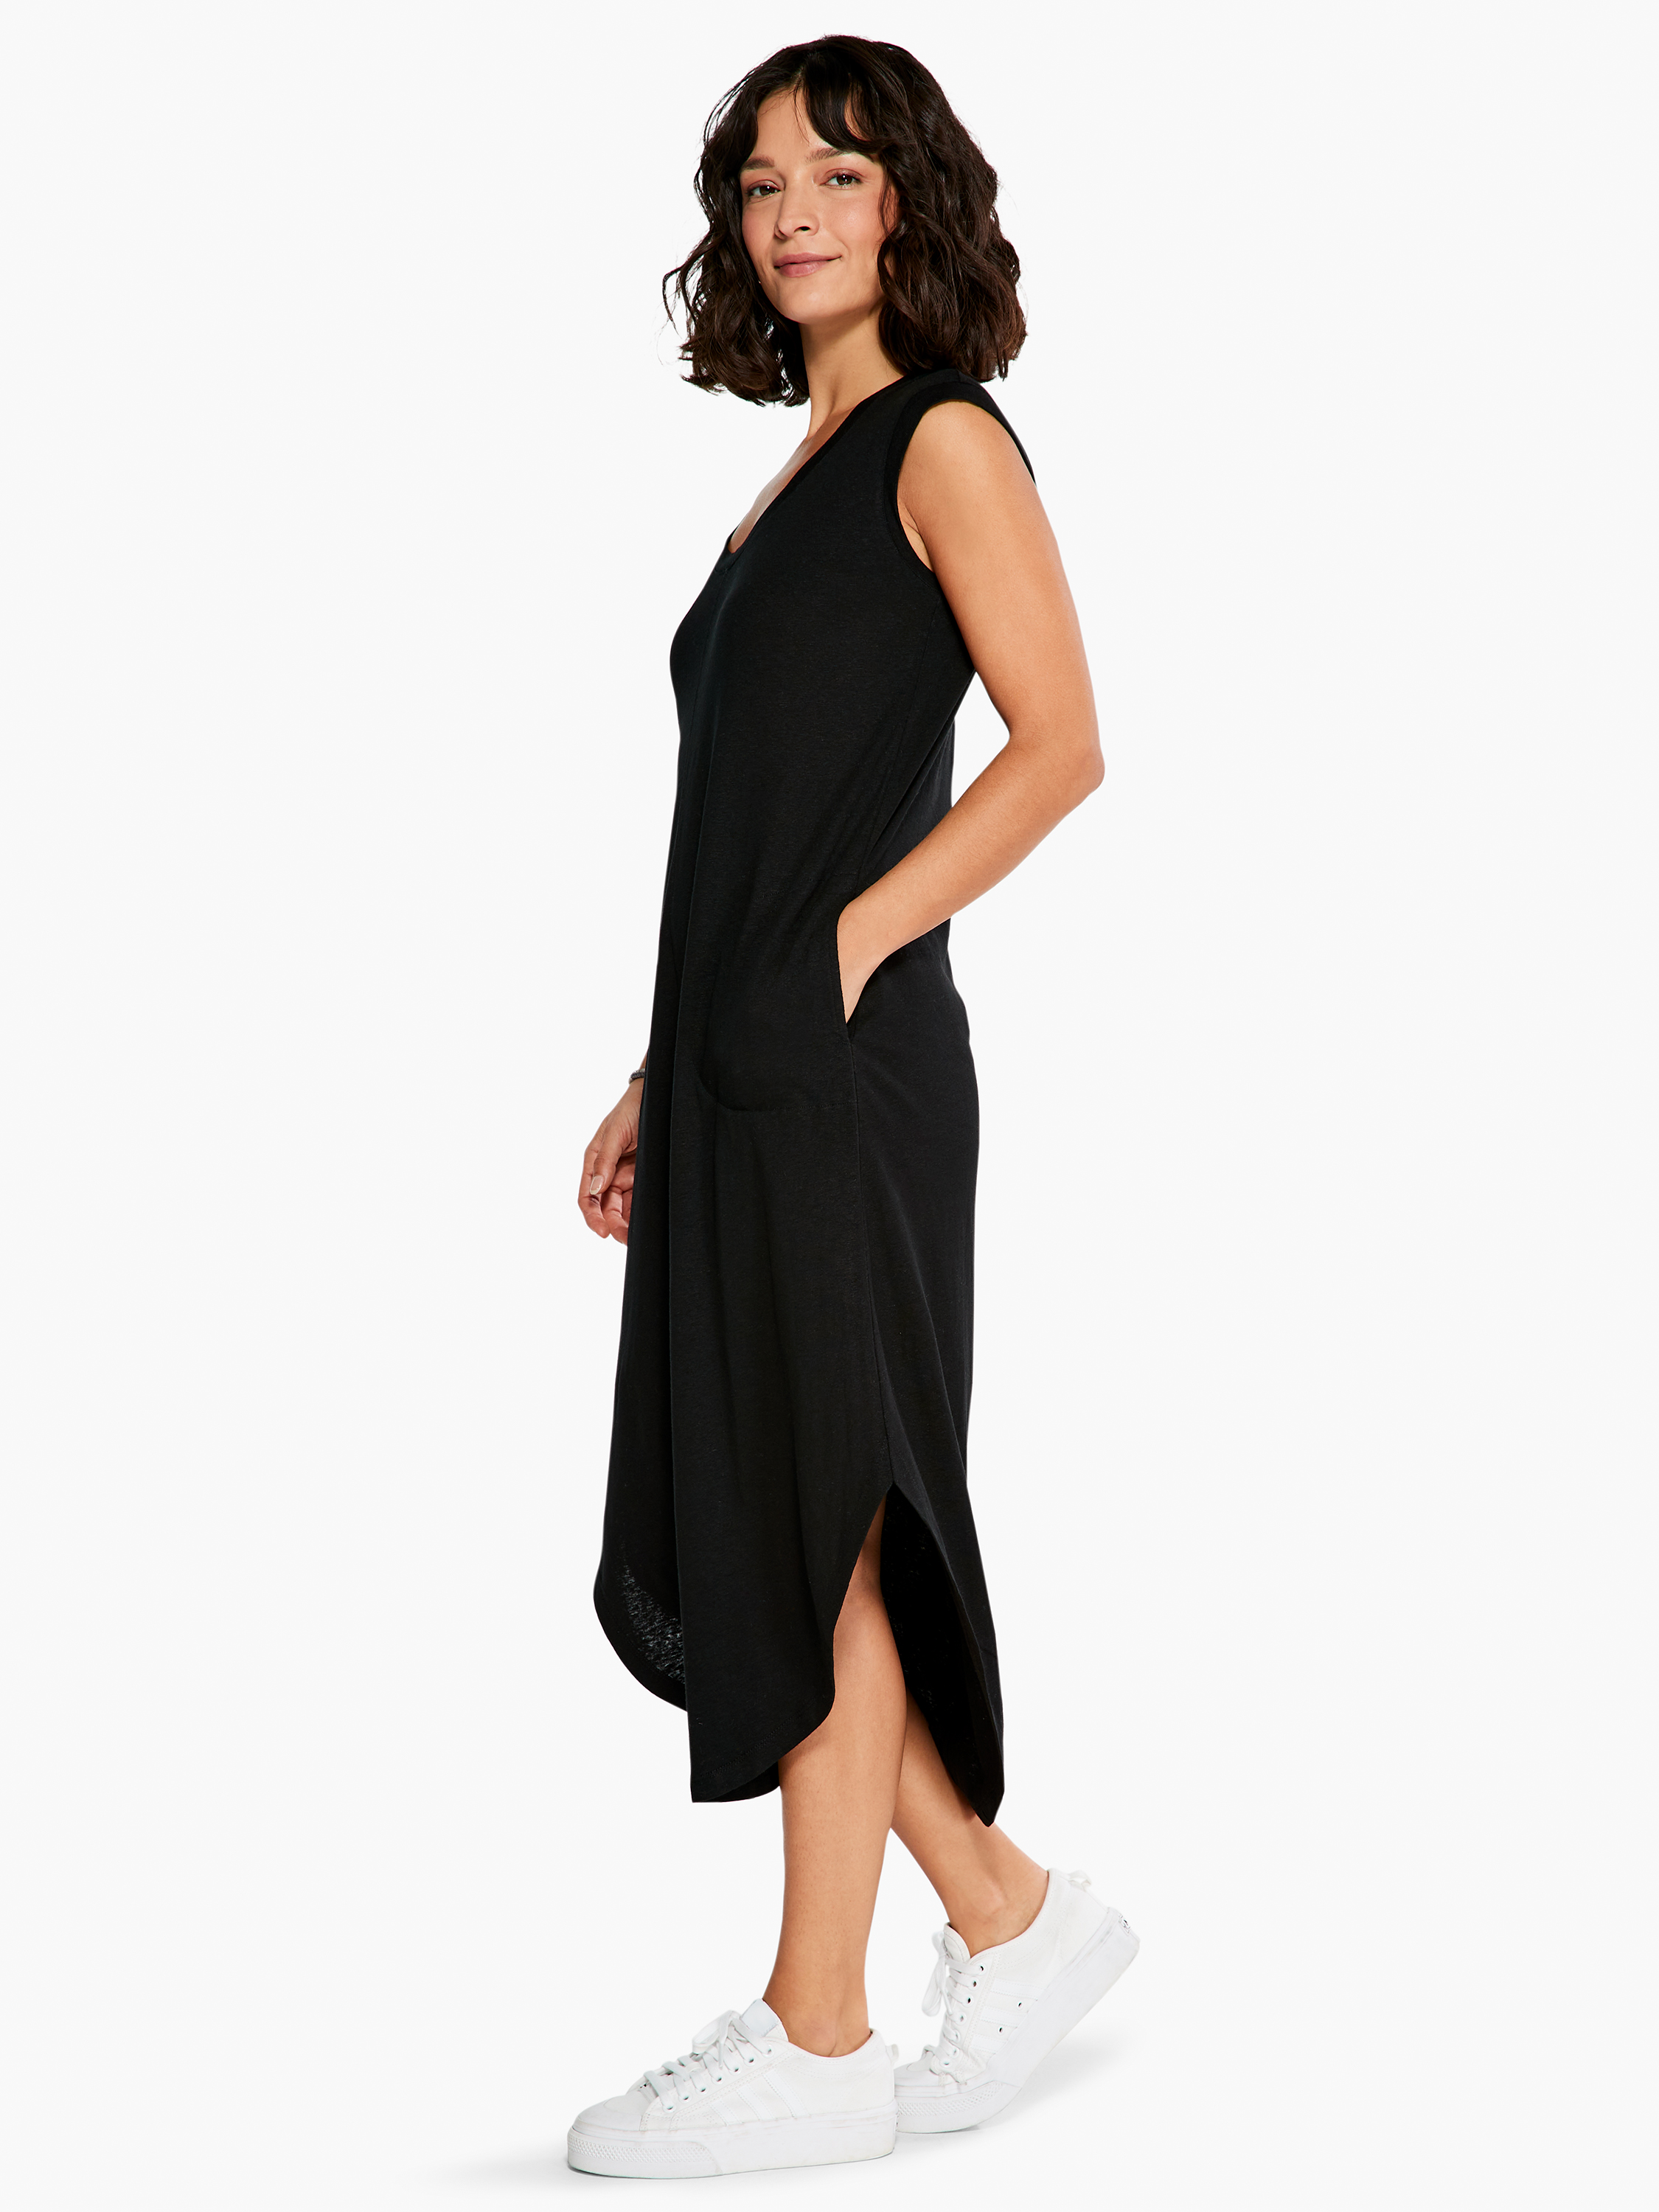 M Made in Italy Women's Scoop Neck Shift Dress with Balloon-Sleeves